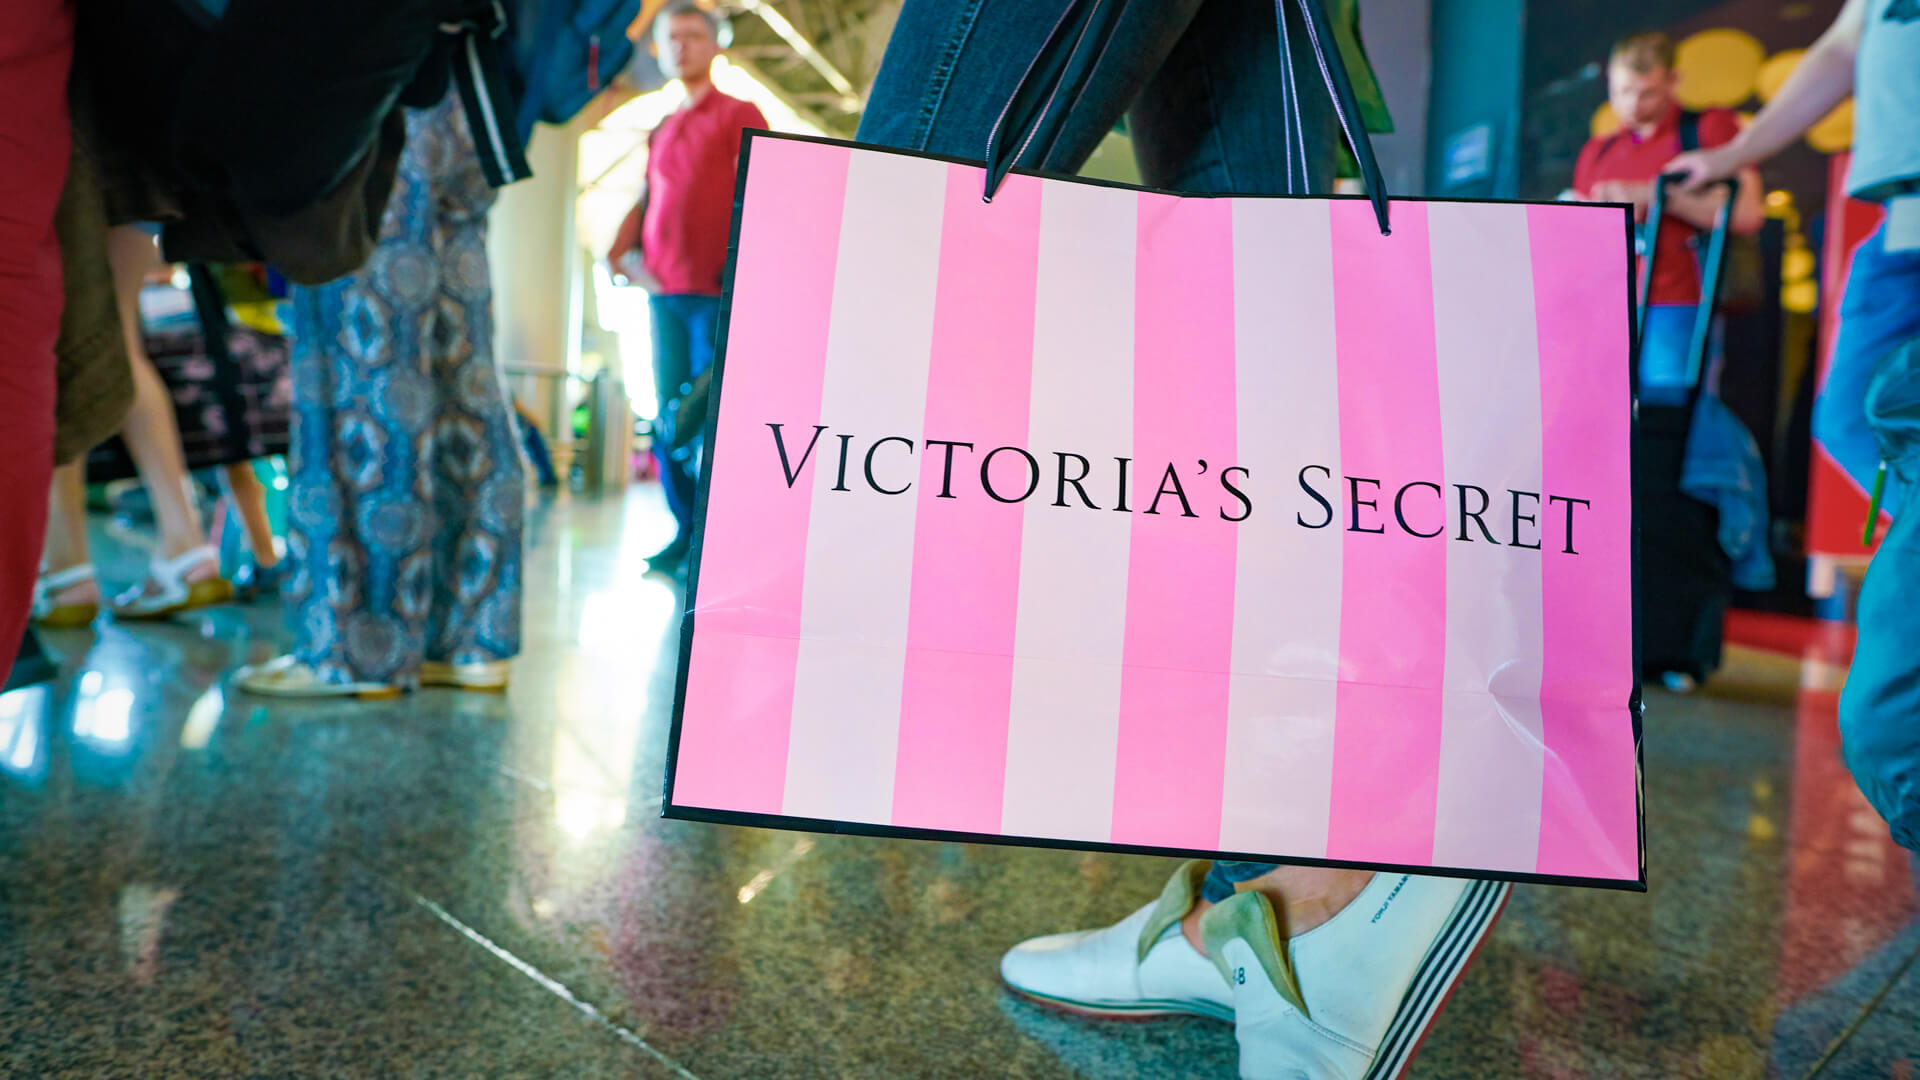 Victoria's Secret Credit Card Review: Is It Worth It? | GOBankingRates